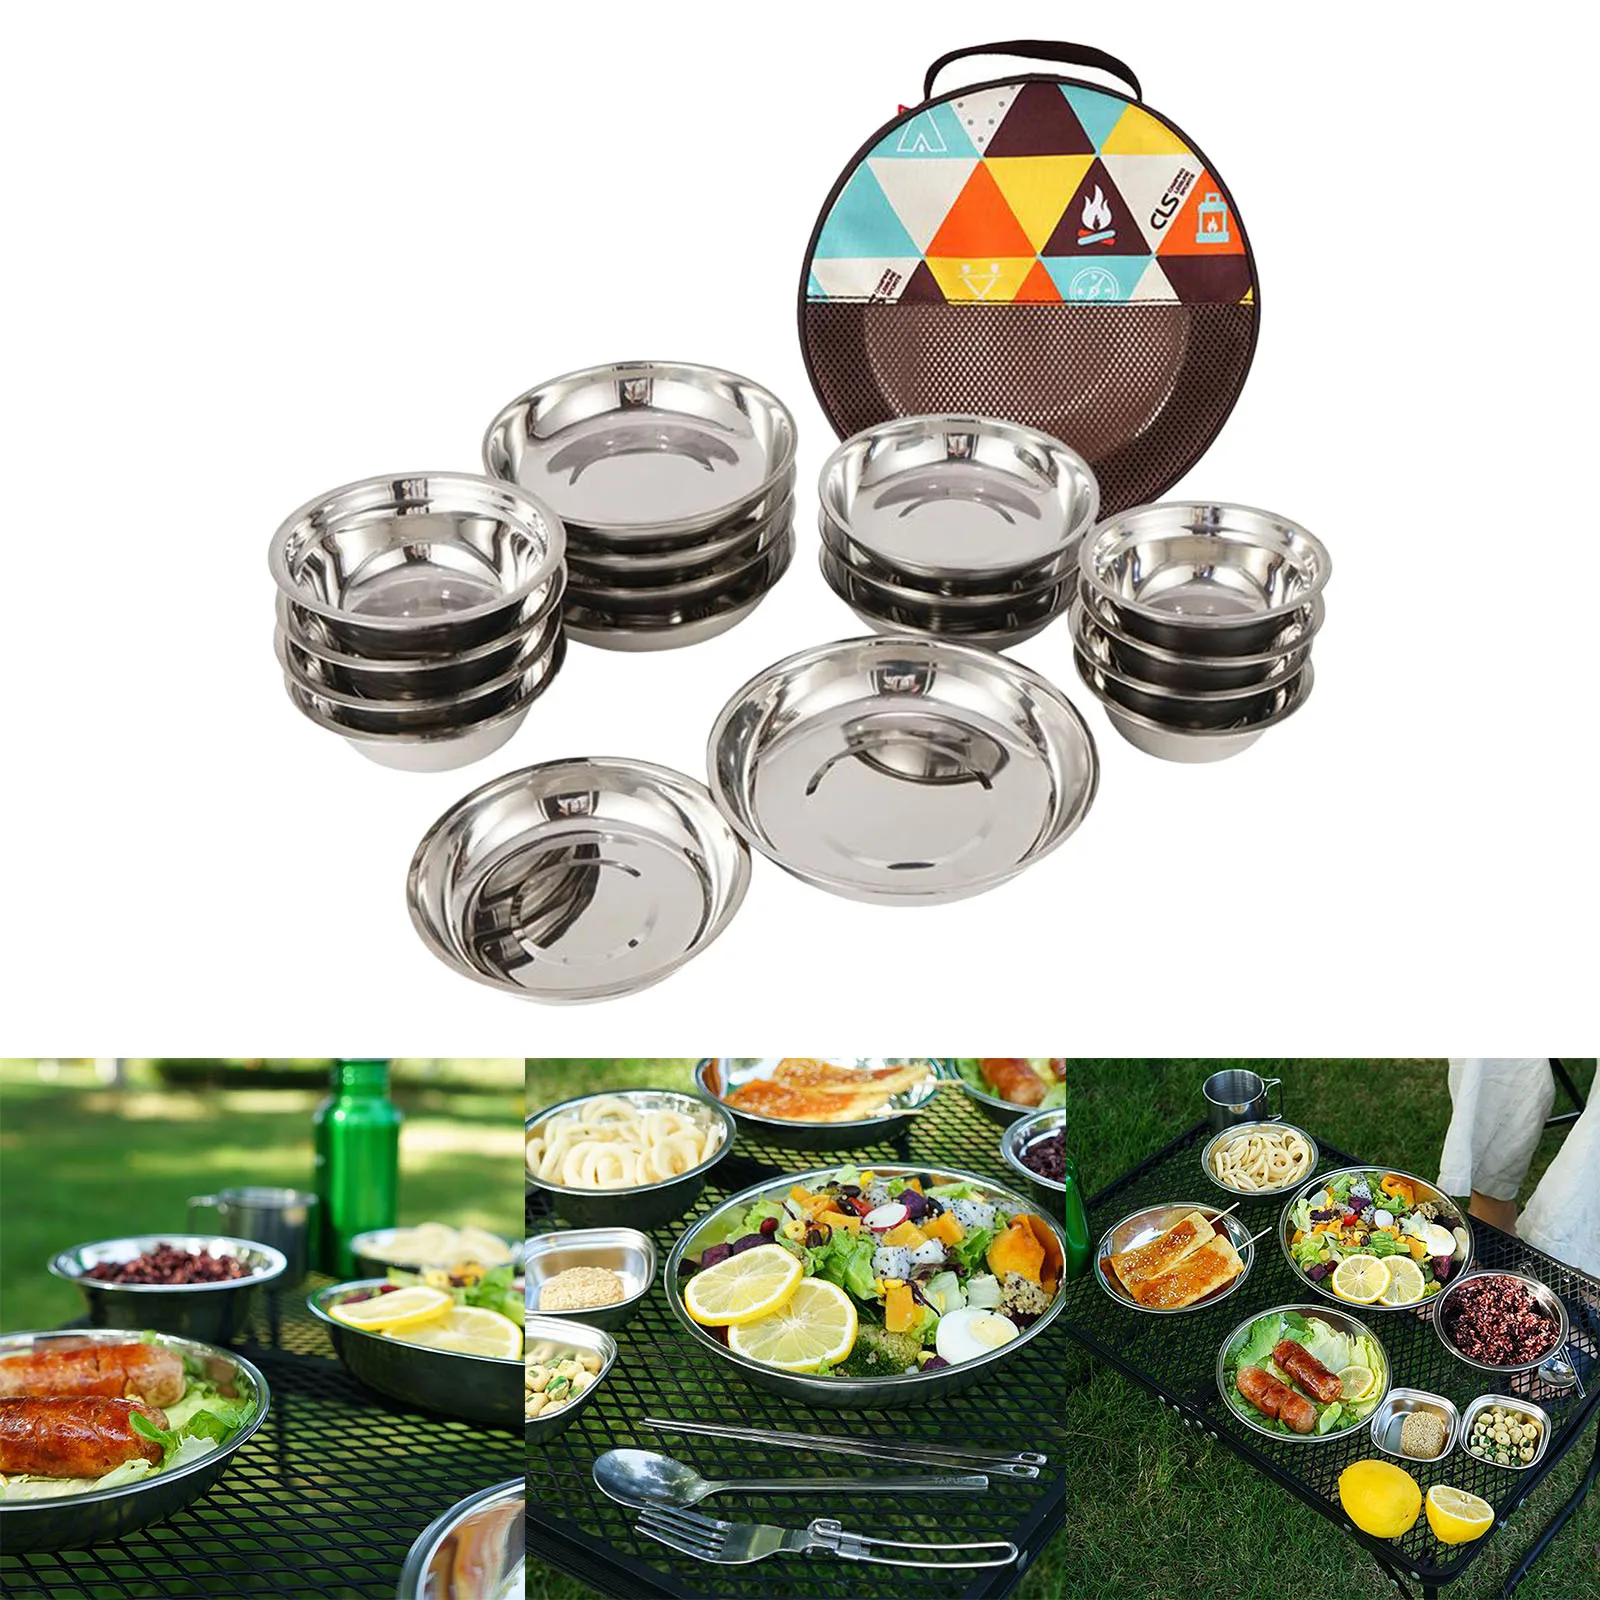 1 Set of 17Pcs Camping Mess Kit Outdoor Tableware Stainless Steel Plate Bowl with Storage Bag for Hiking Travel Picnic